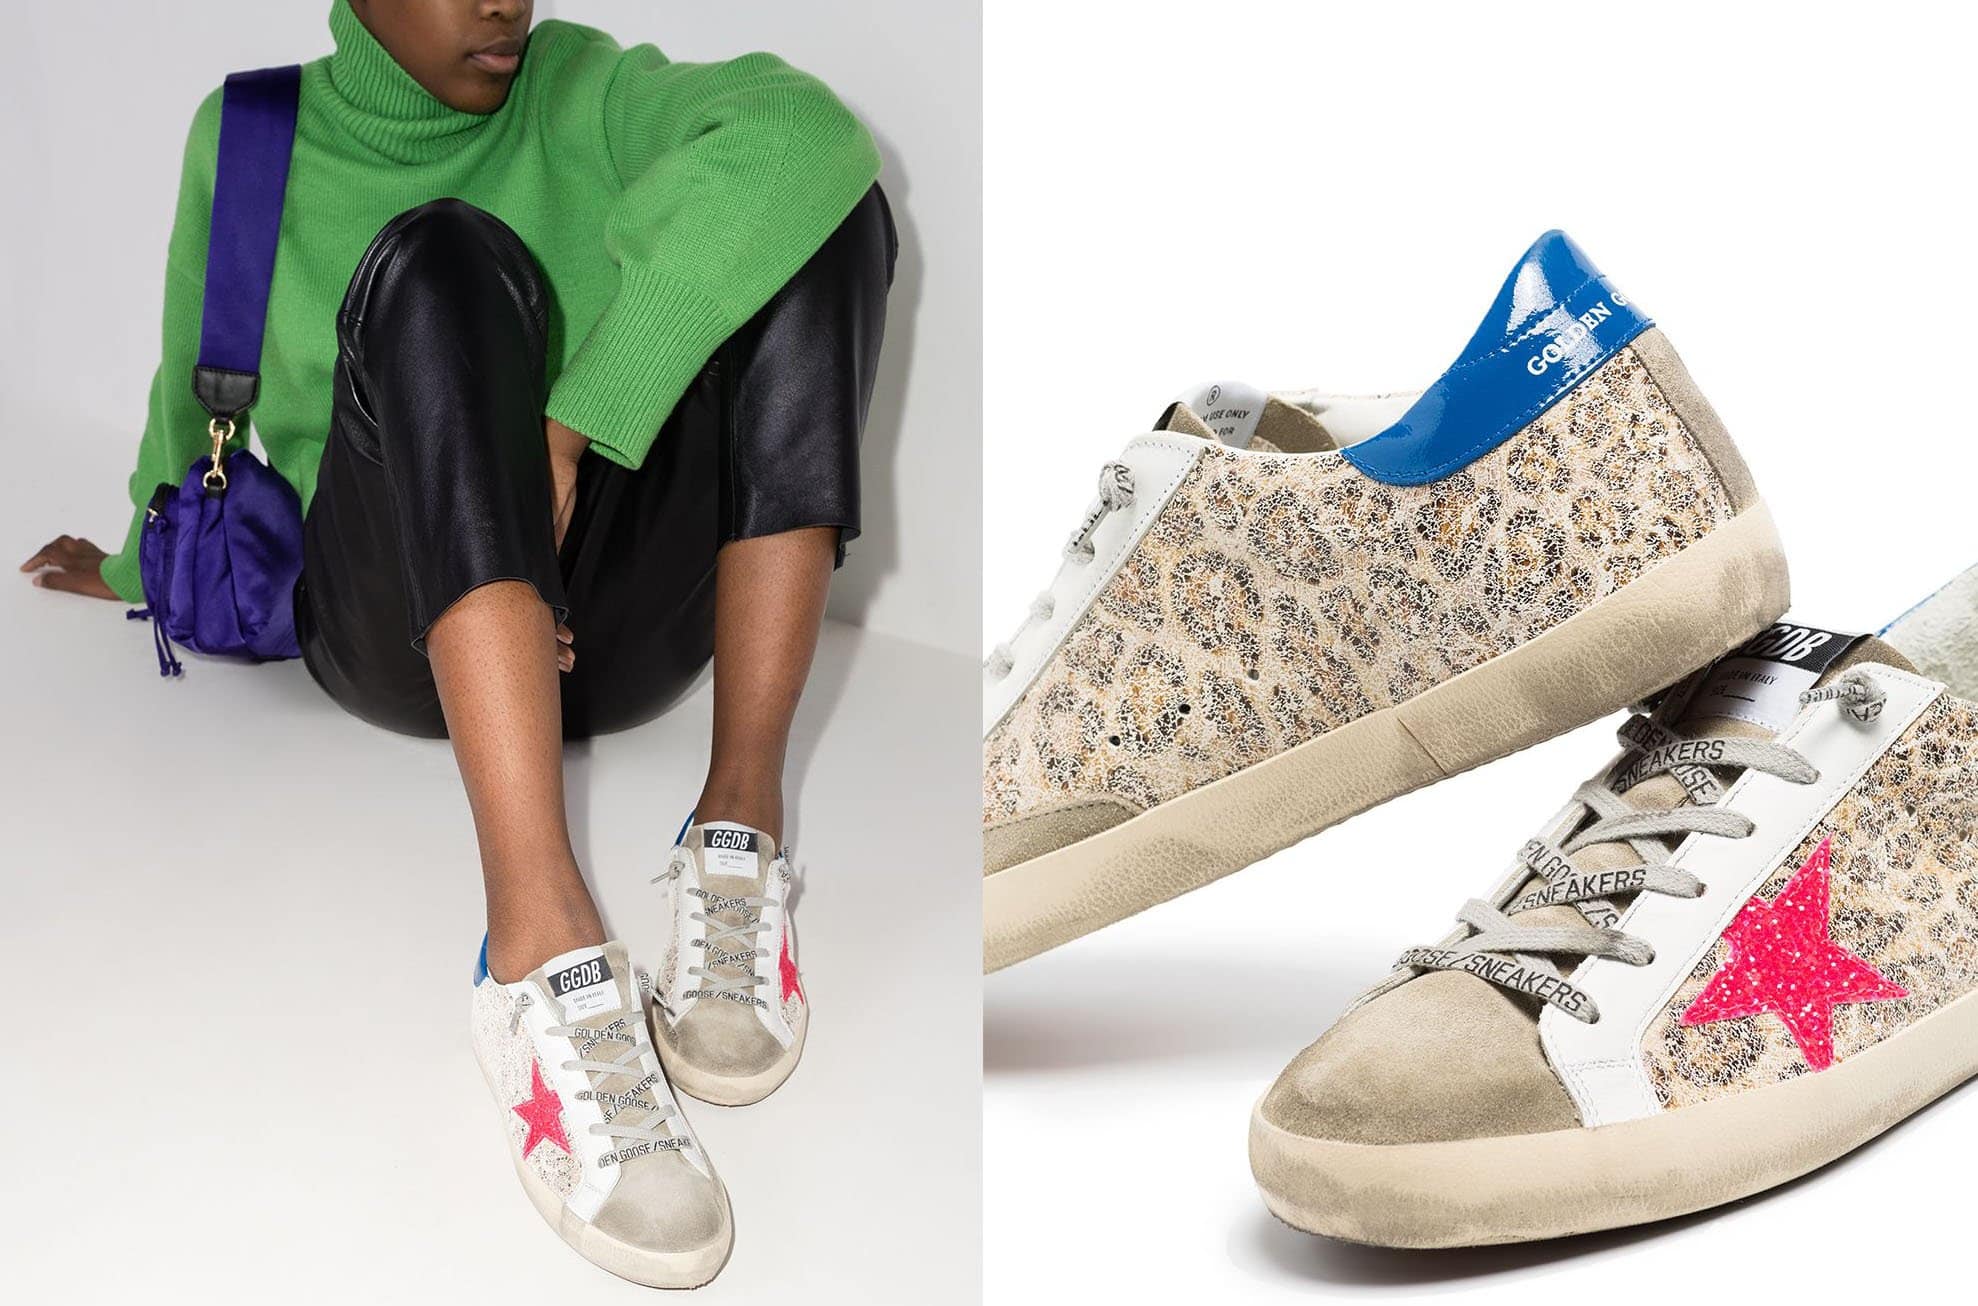 These Golden Goose sneakers feature textured leopard-print panels and the brand's iconic distressed finish and star patches